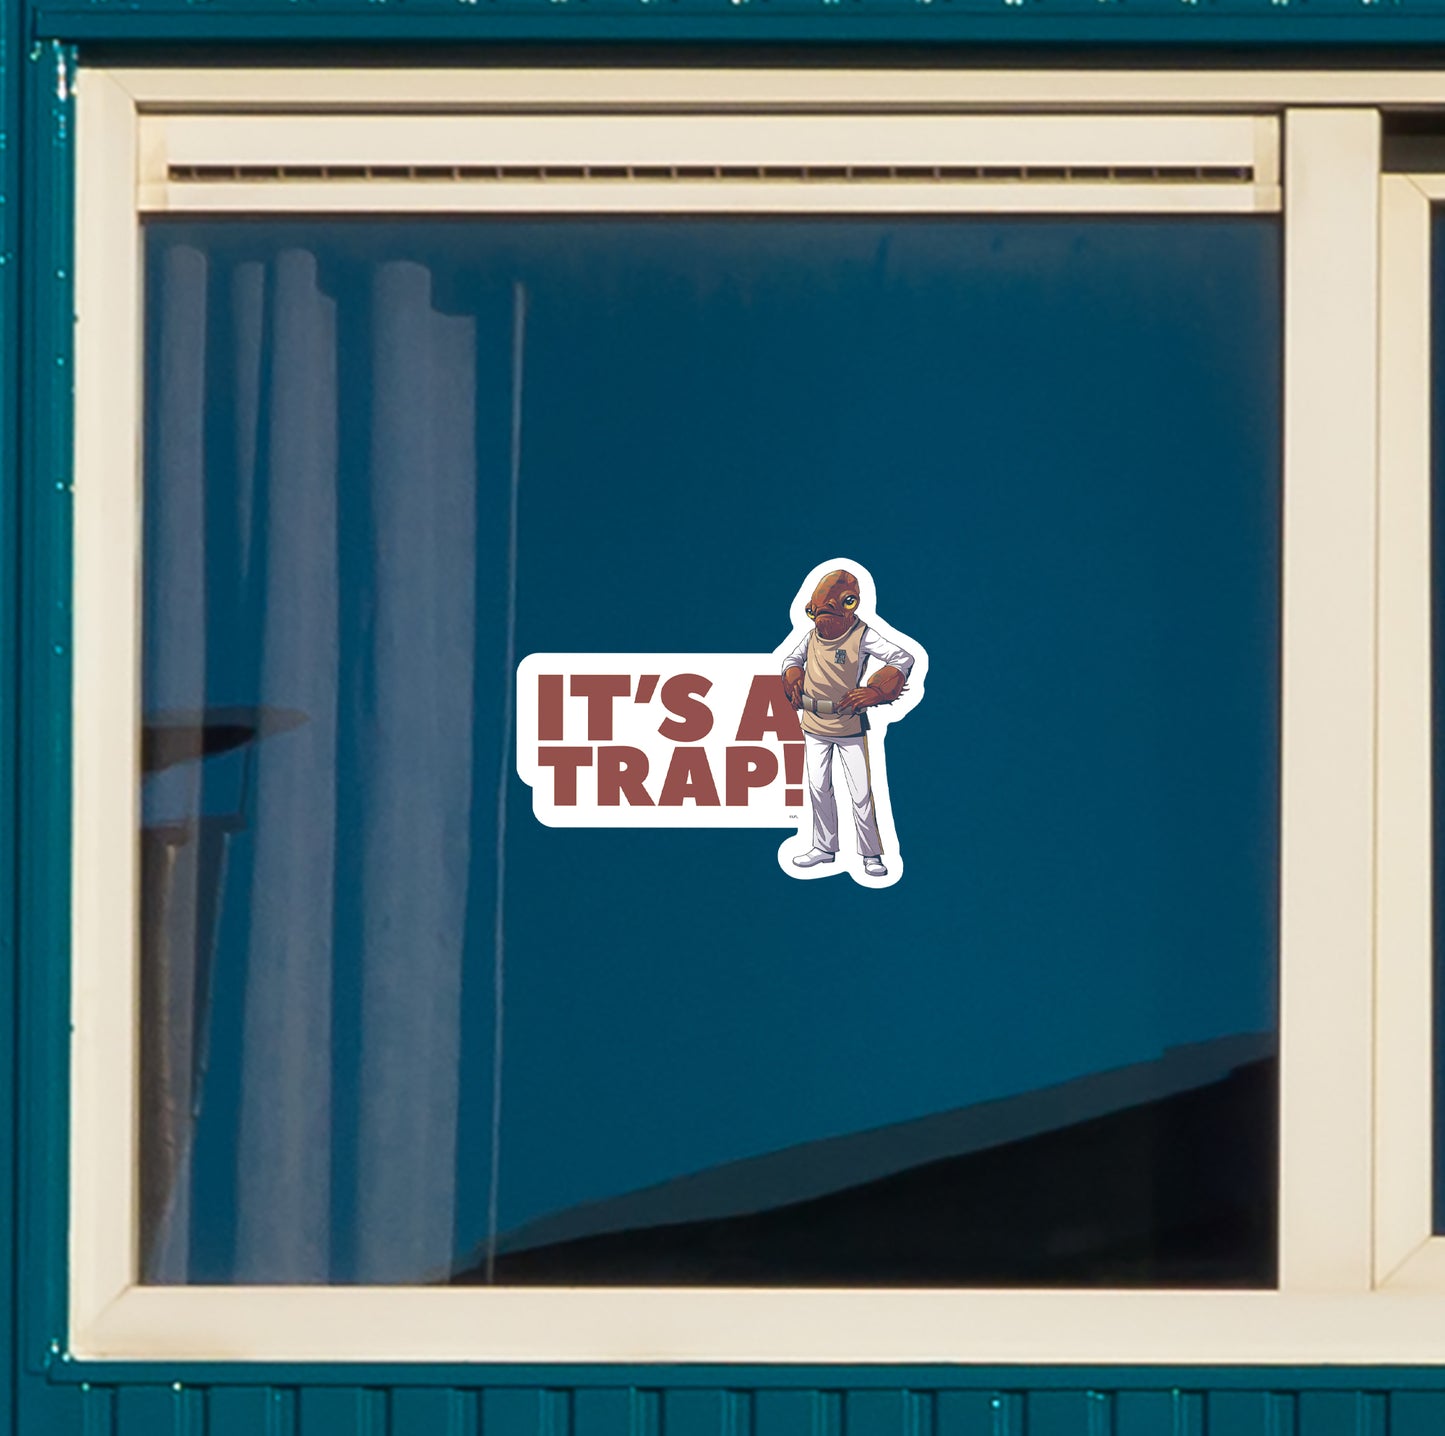 Admiral Ackbar It's a Trap! Quote Window Cling        - Officially Licensed Star Wars Removable Window   Static Decal